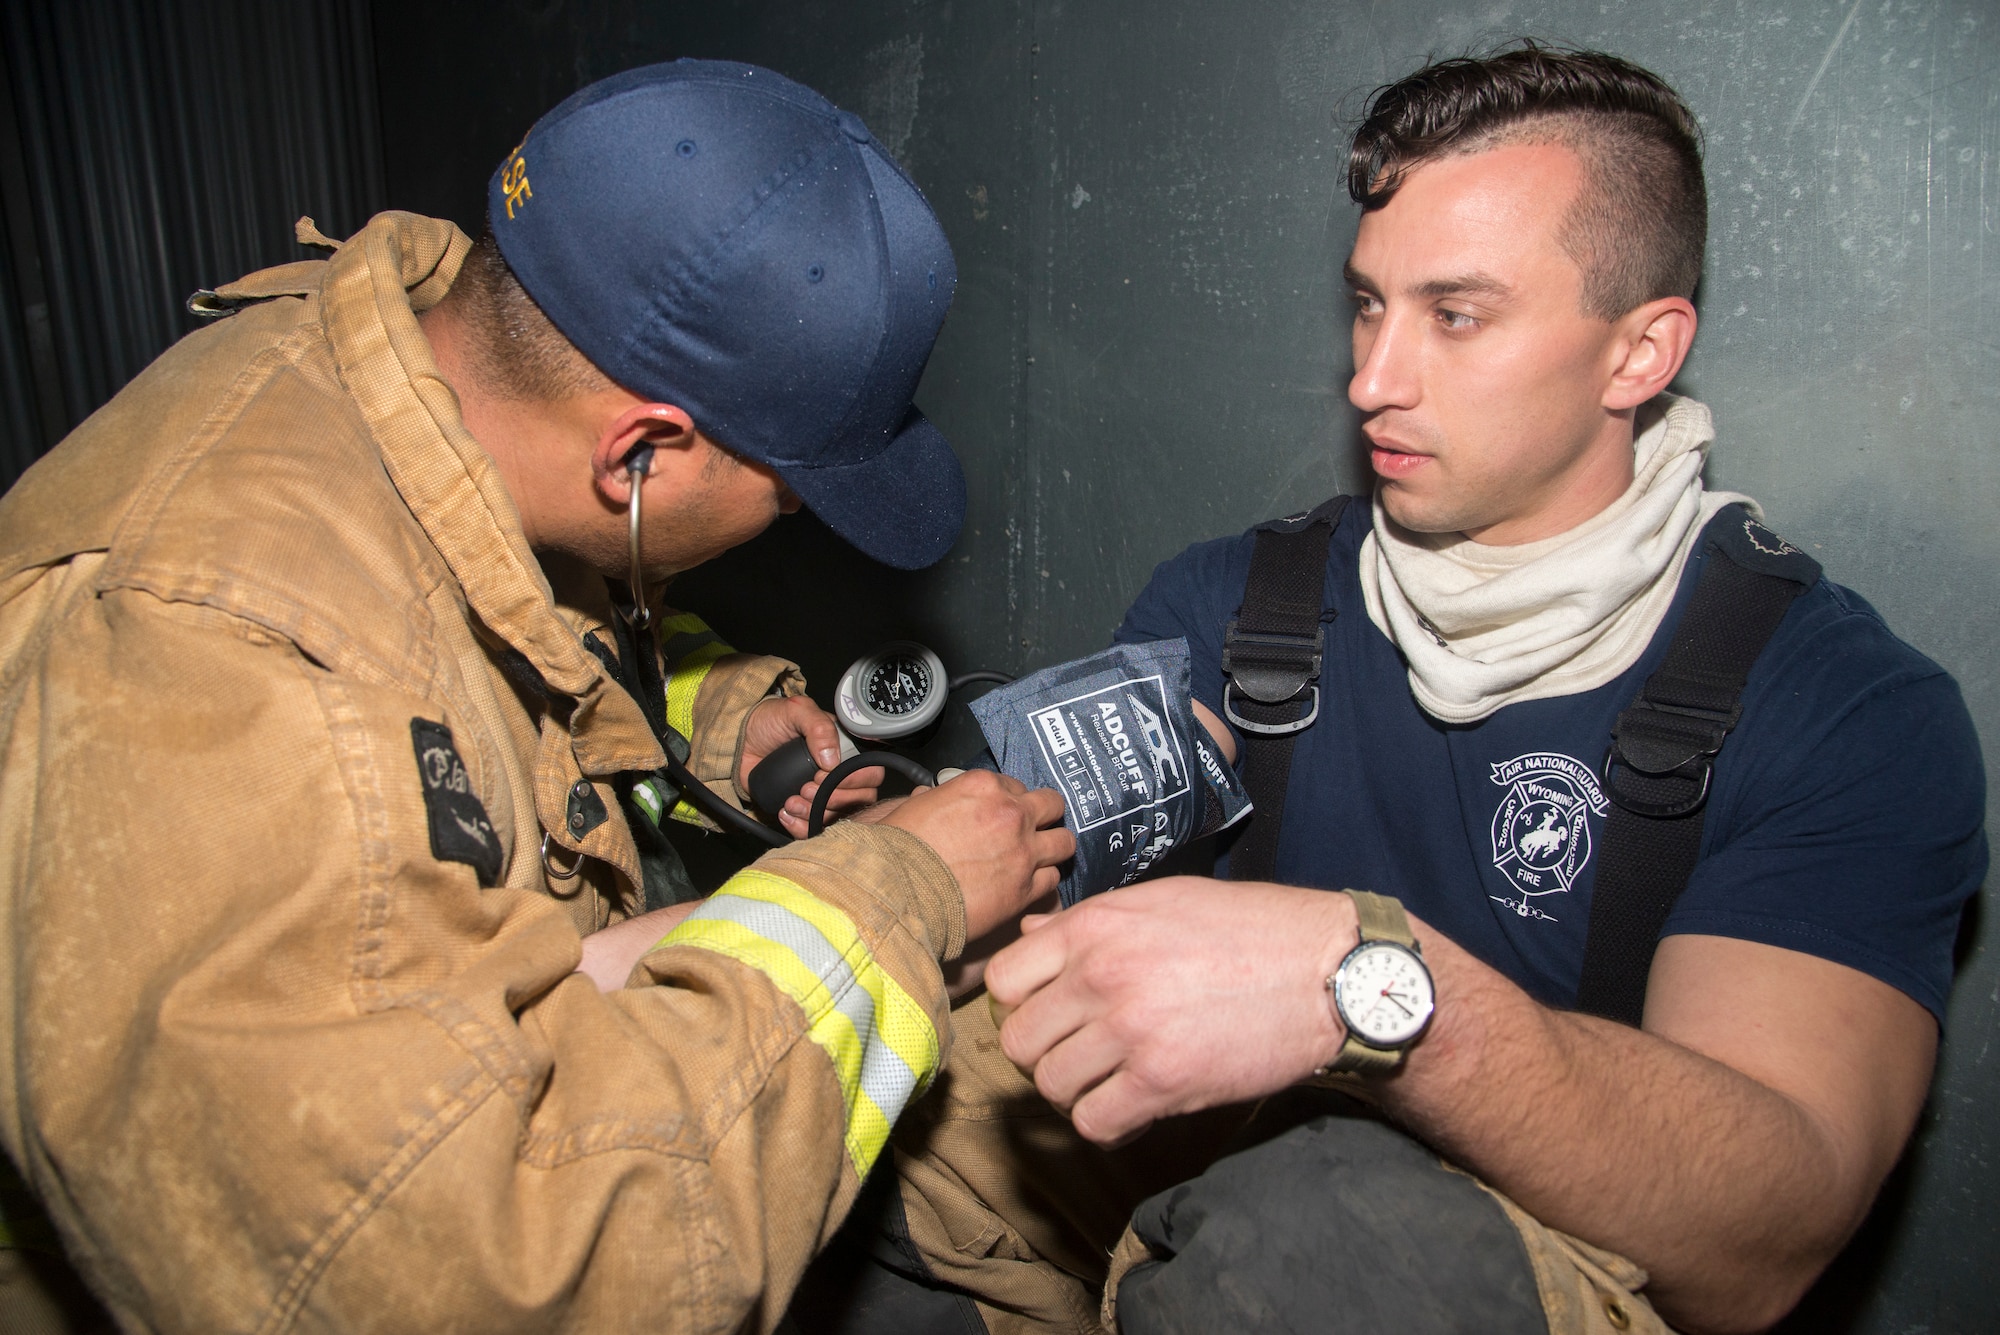 A firefighter measures the vital signs of Senior Airman Kyle Coleman, right, both assigned to the 153rd Airlift Wing in Cheyenne, Wyo., during a joint, firefighting training exercise at MacDill Air Force Base, Fla., March 5, 2019.